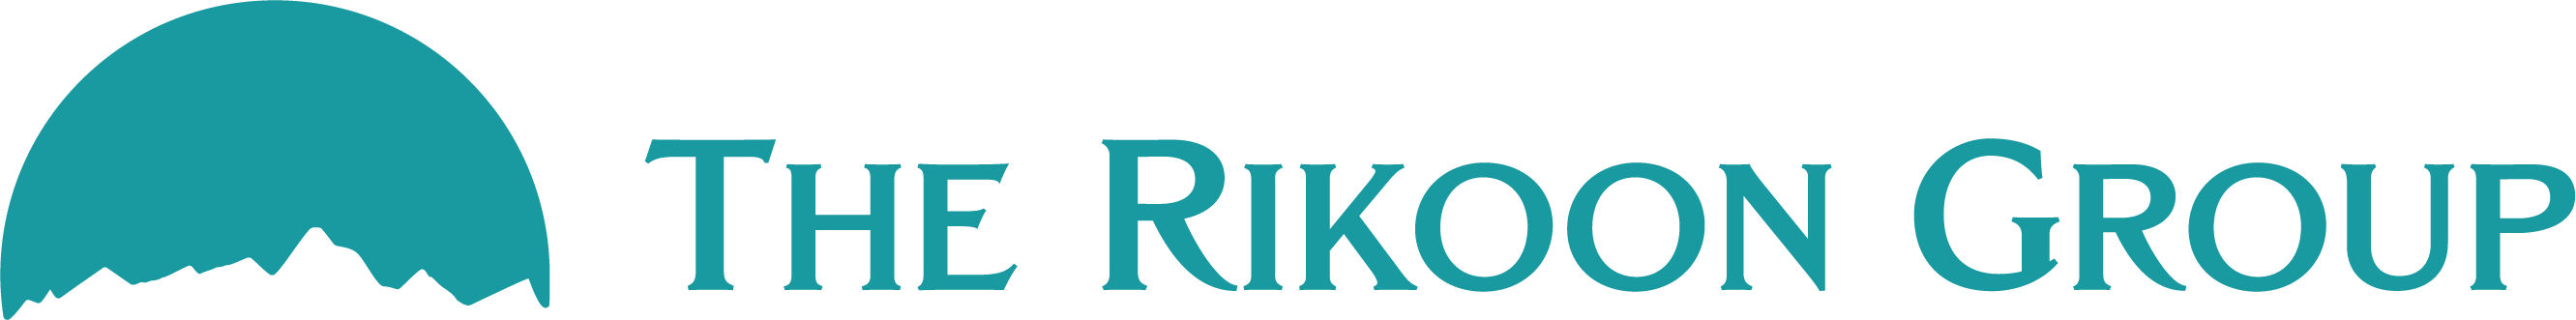 the rikoon group financial advisory firm logo - vertical